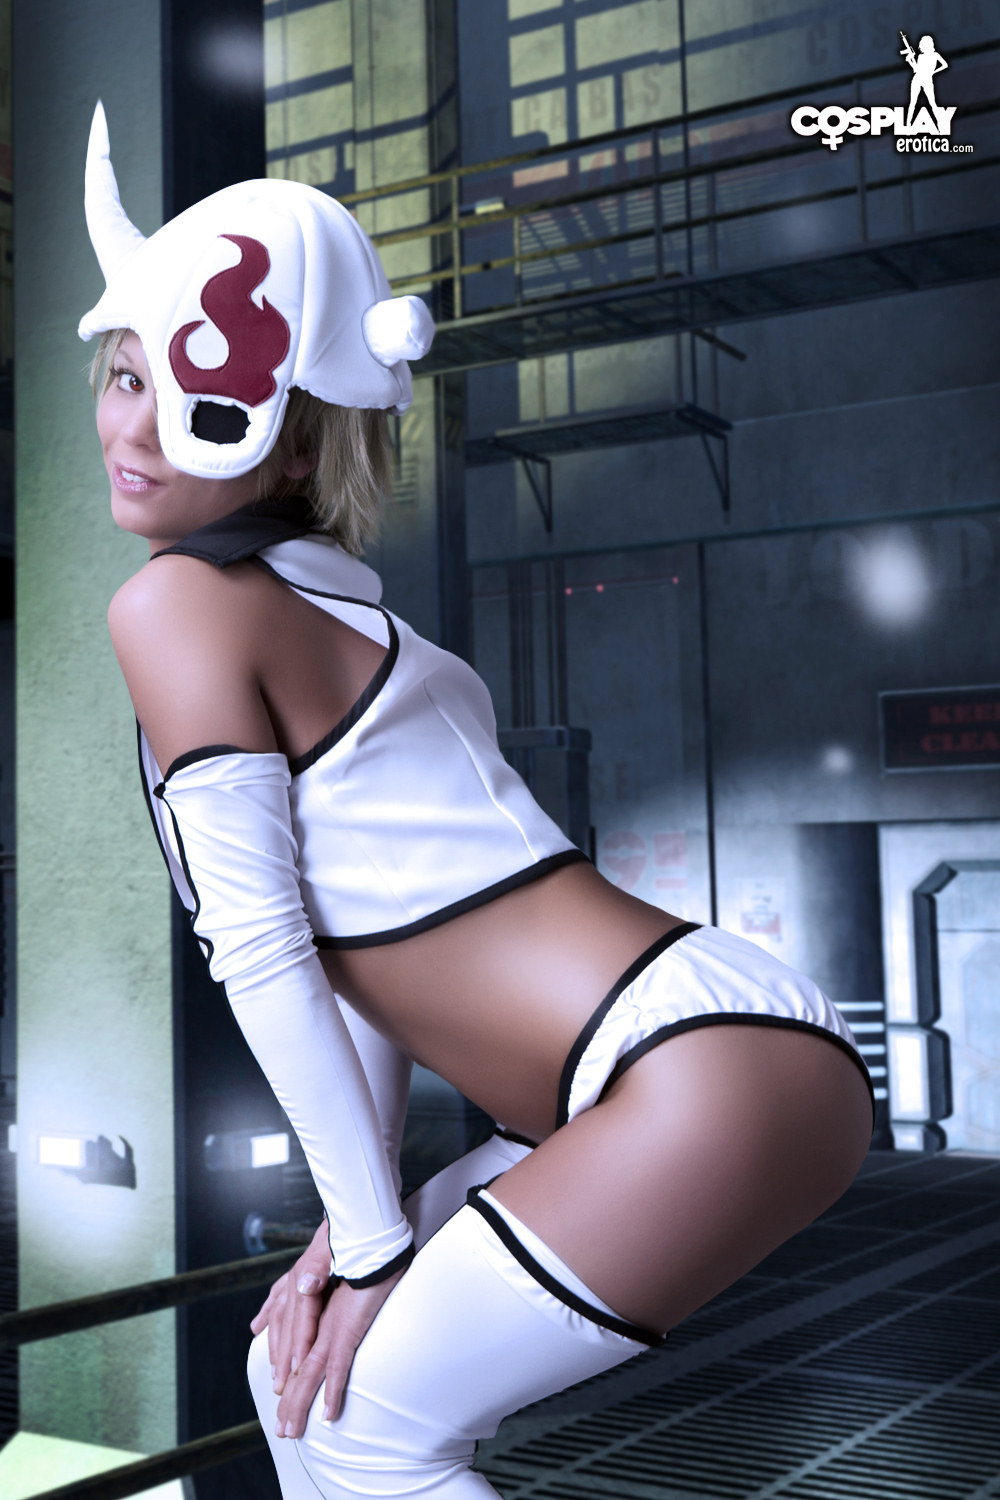 Melane - The Cutest Arrancar shows free gallery picture 06-06